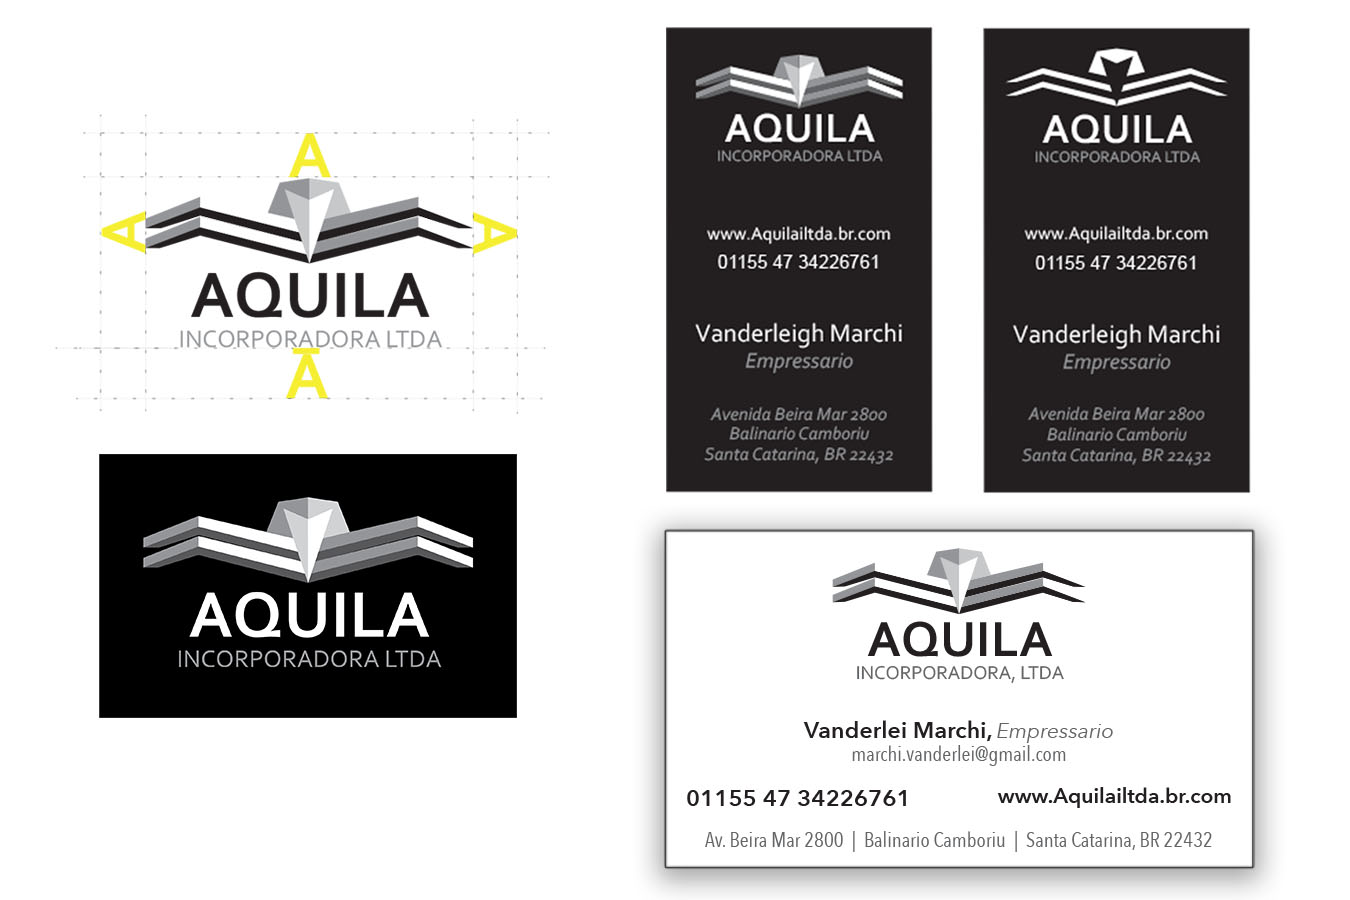 Aquila 3 : Options for logo use and business card